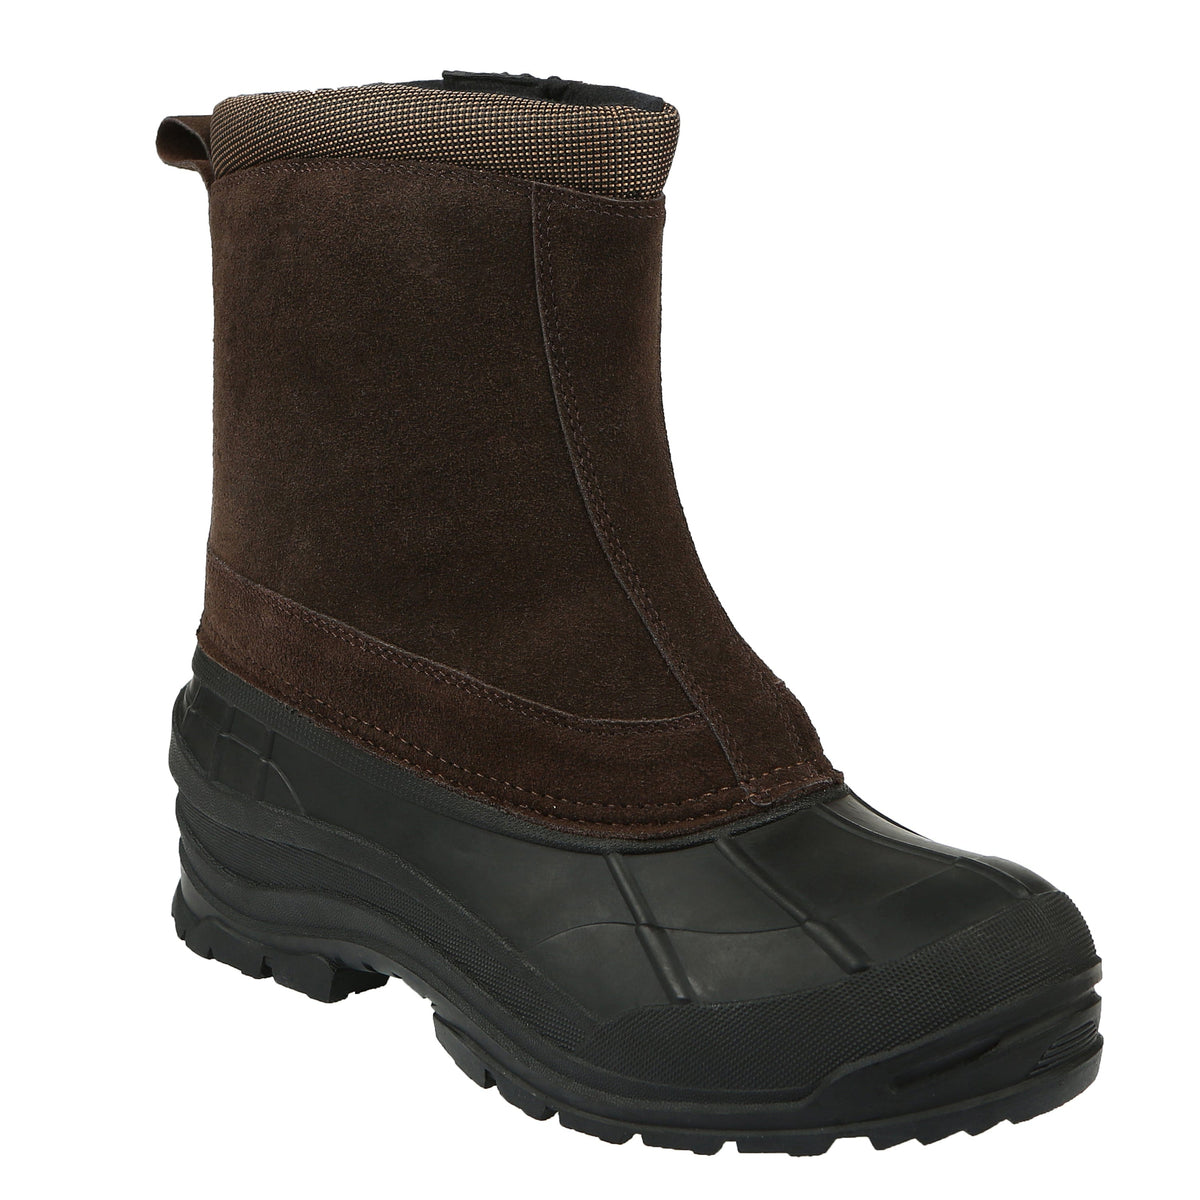 Men's Albany Insulated Winter Snow Boot